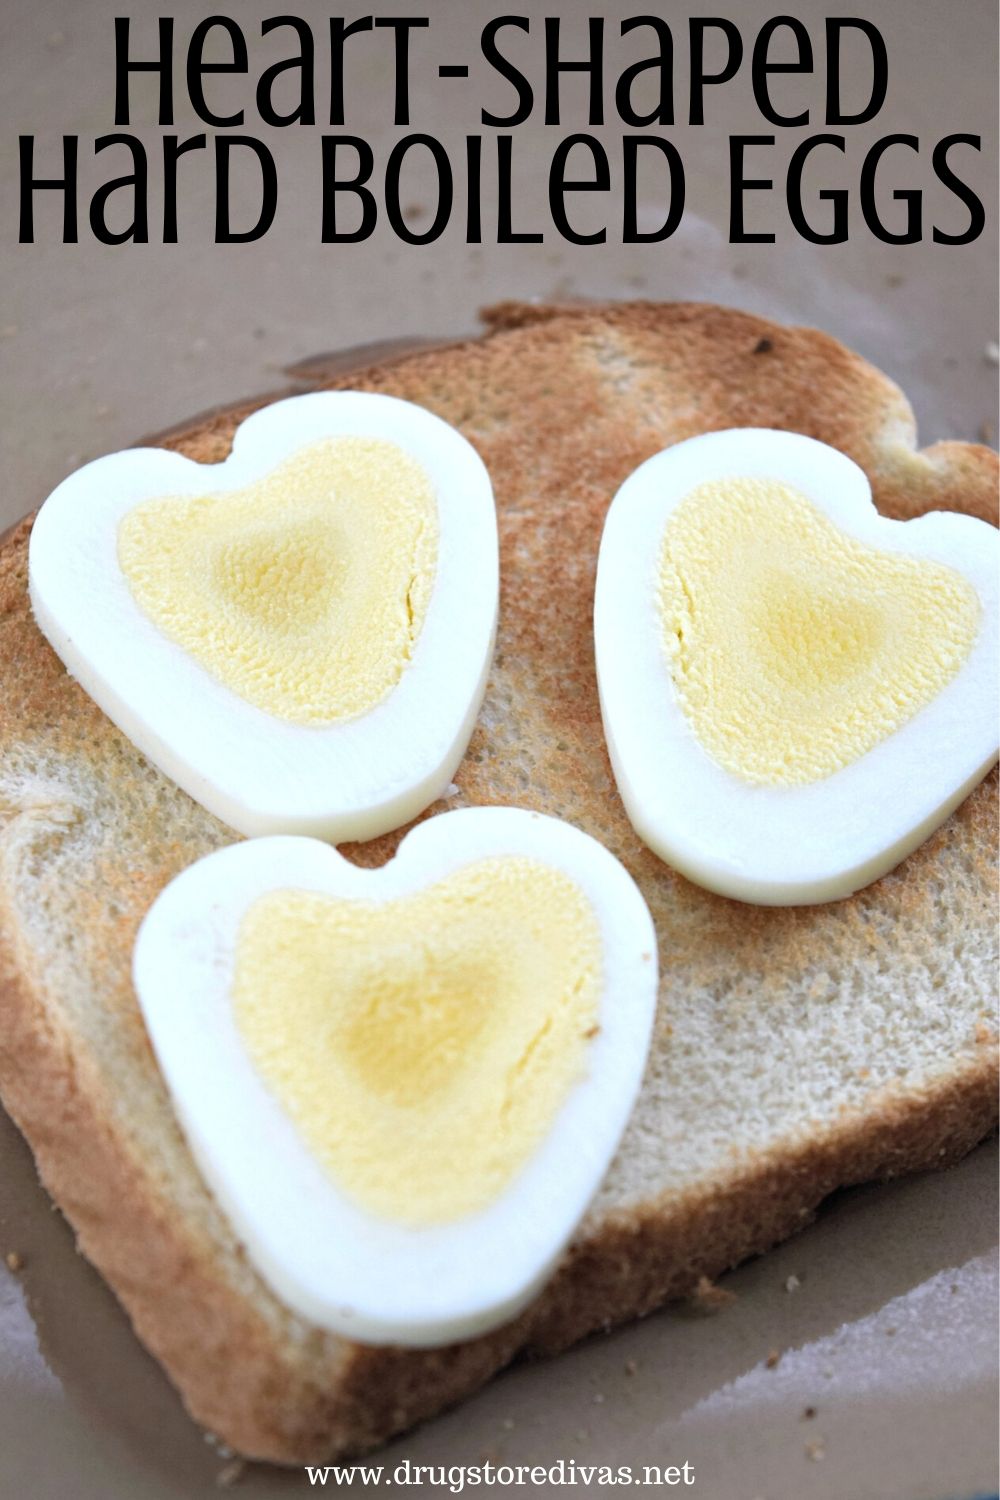 Add a little pizzazz to your breakfast (especially on Valentine's Day) with these heart-shaped hard boiled eggs. Find out how to make them on www.drugstoredivas.net.